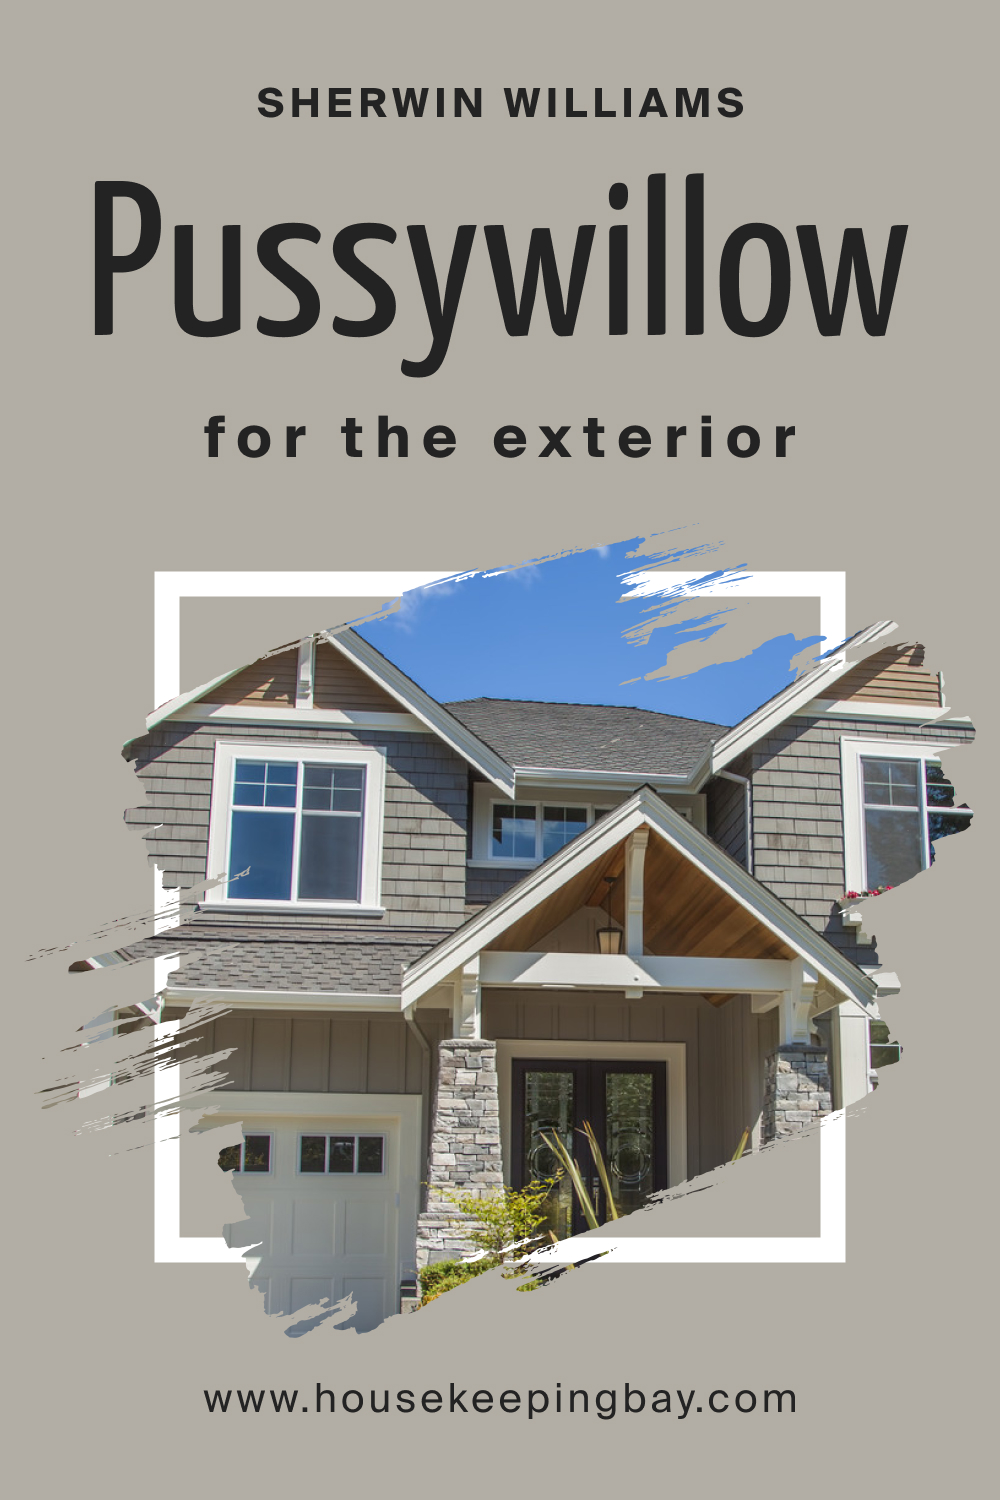 Sherwin Williams. Pussywillow SW 7643 For the exterior